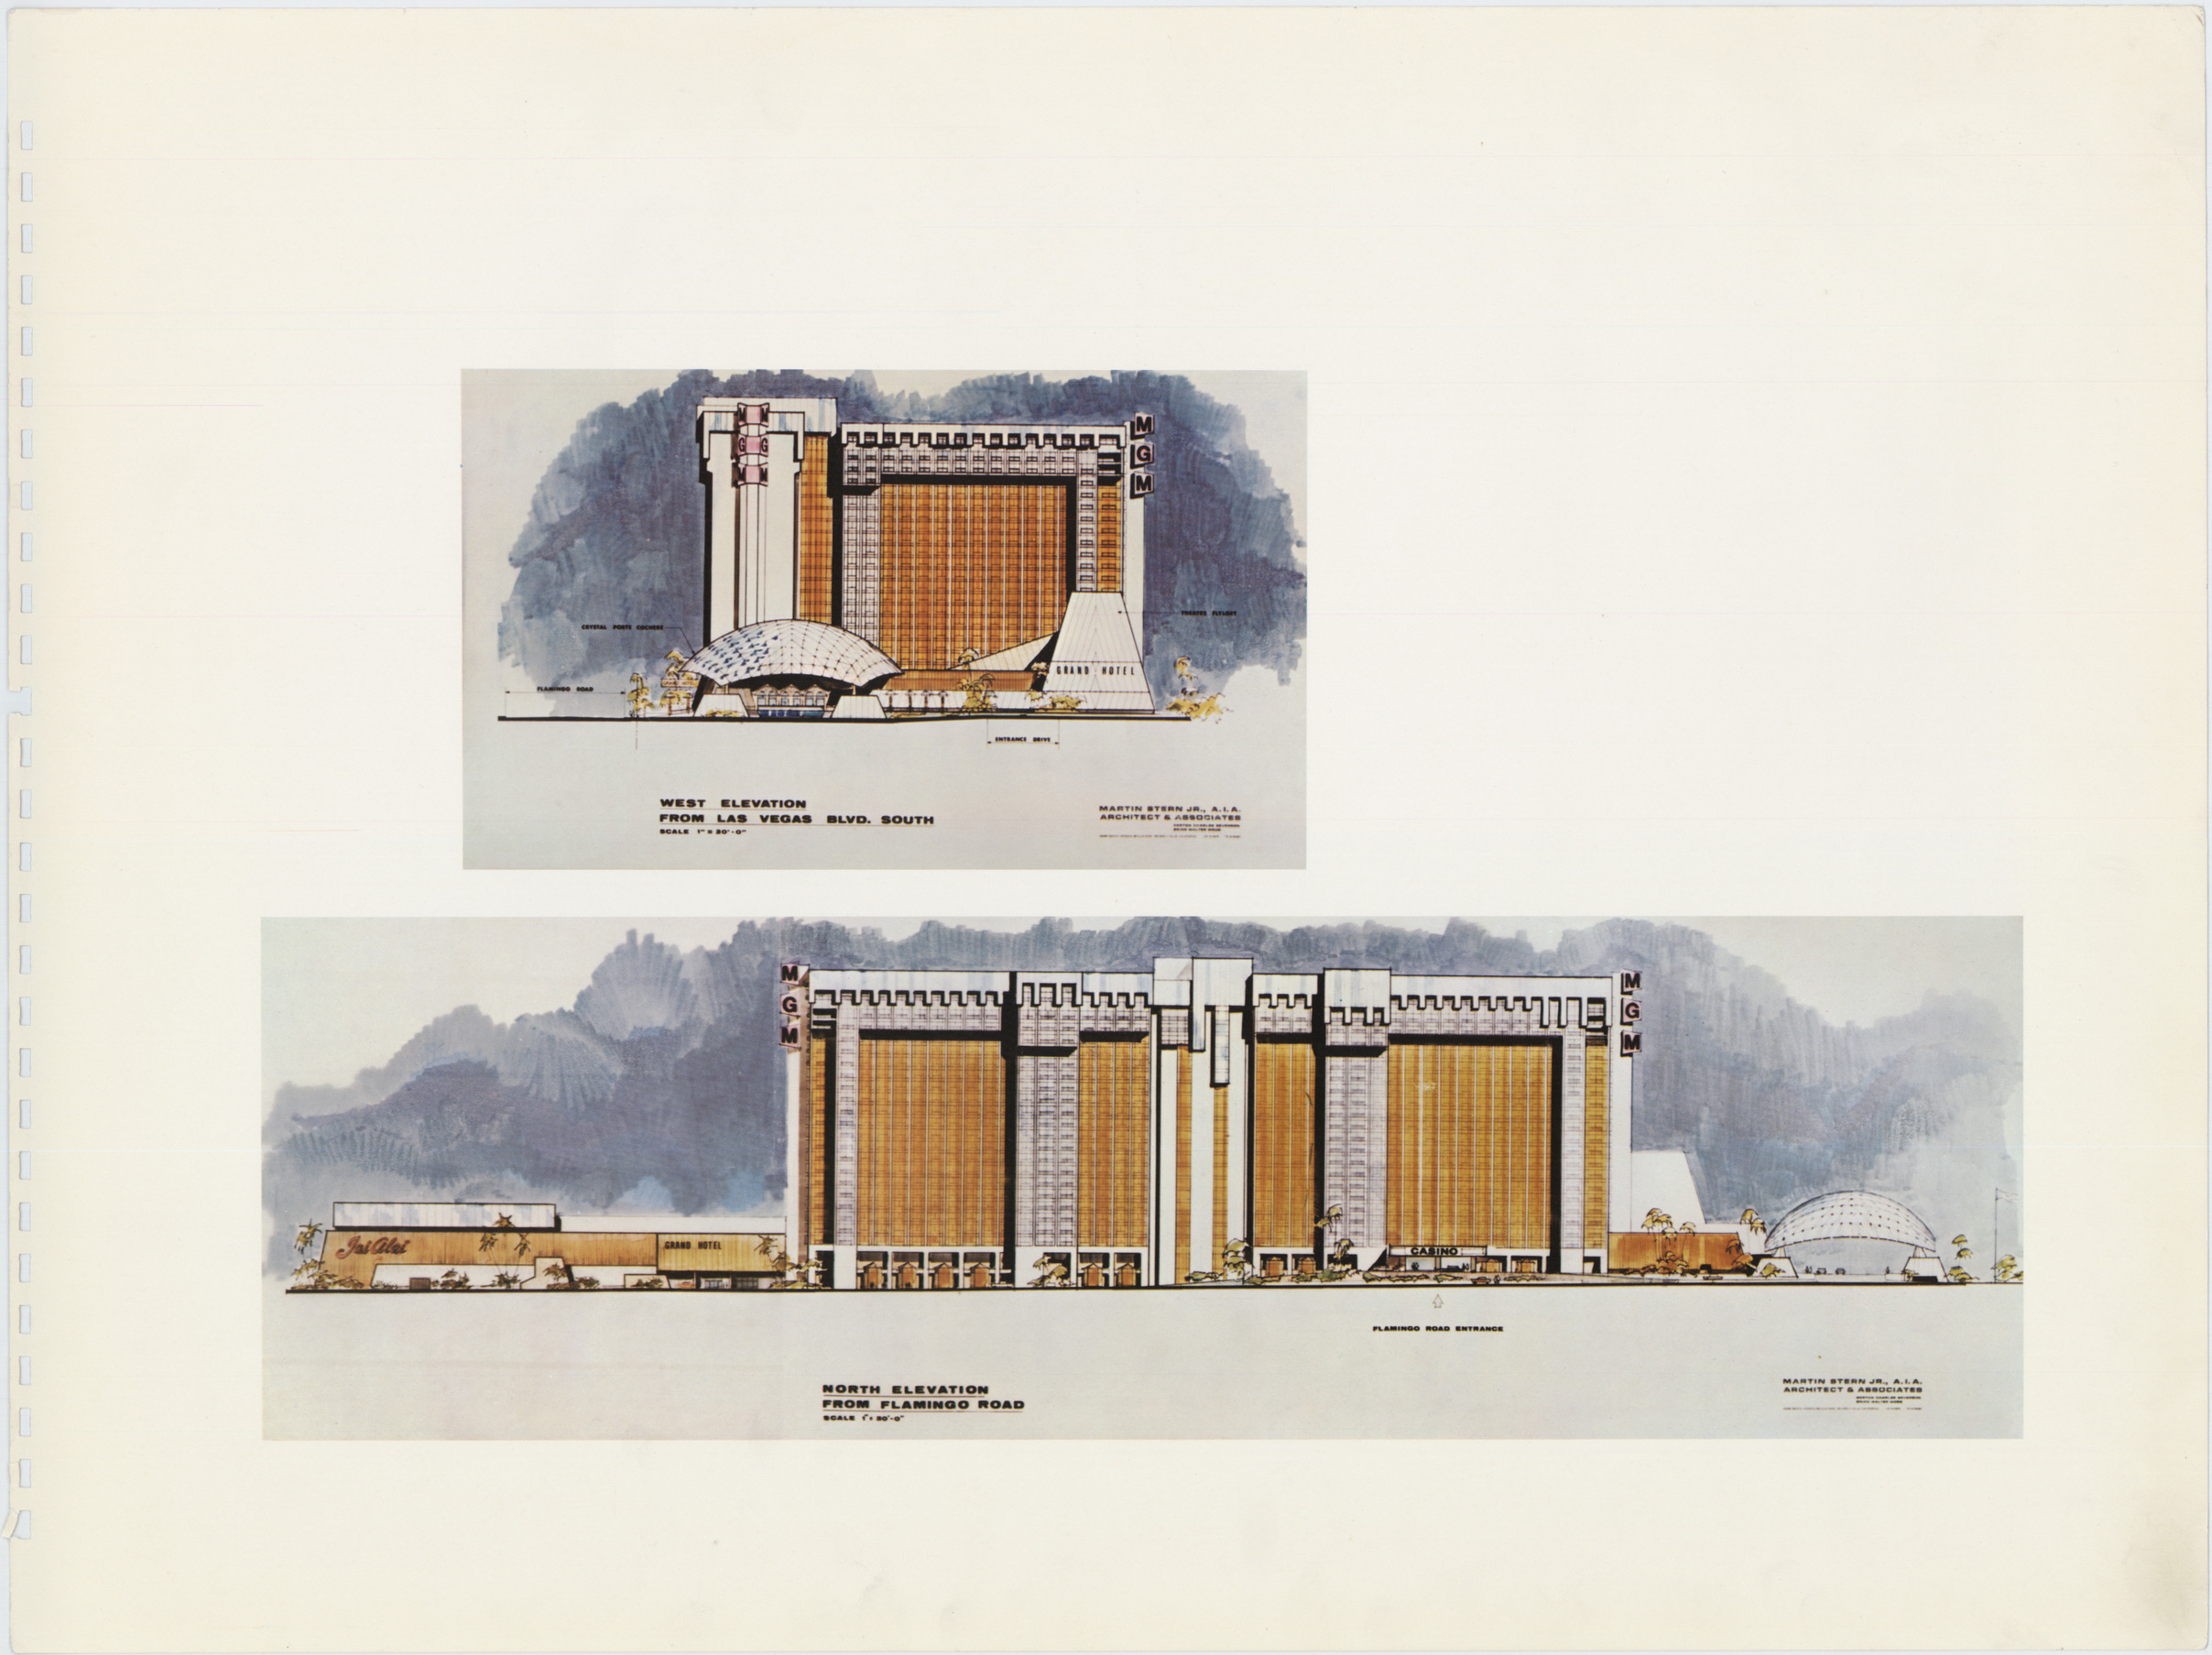 Proposal for the MGM Grand Hotel (Las Vegas), circa 1972, image 3